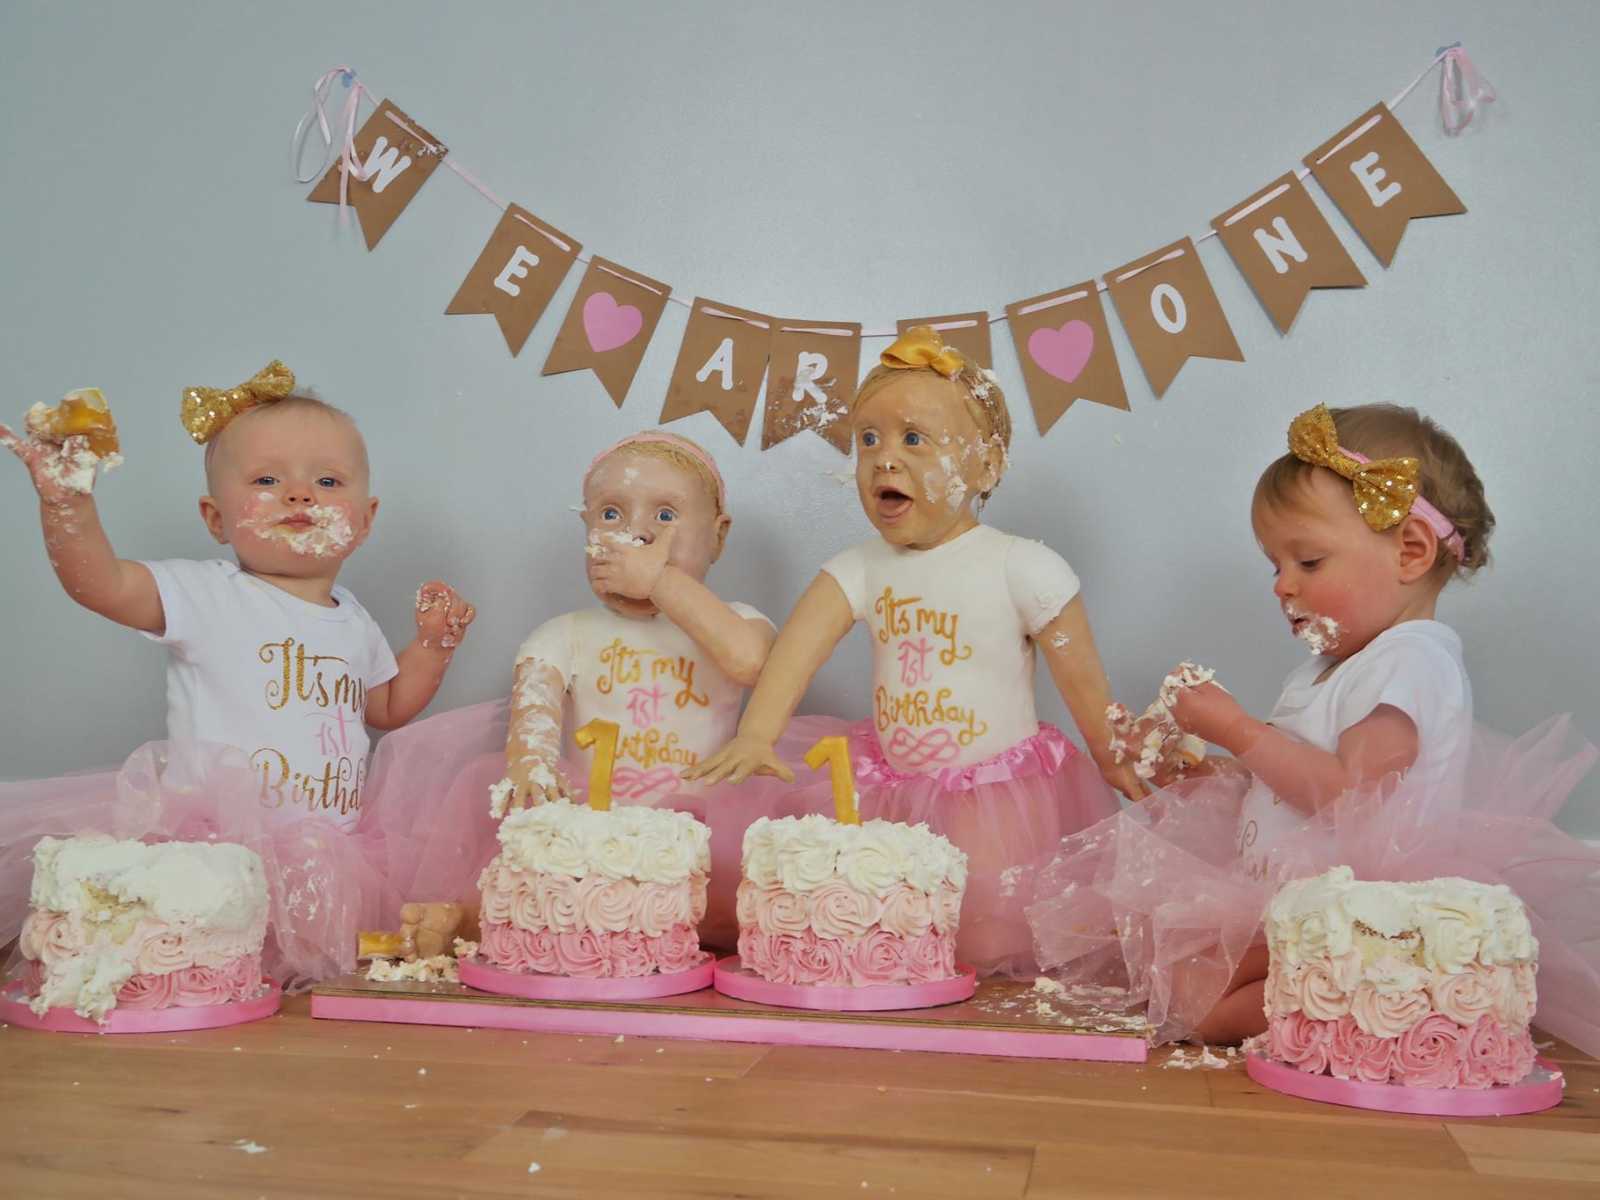 two babies in gold bows and pink tutus sitting on a table with birthday cake next to two cakes that look like real babies